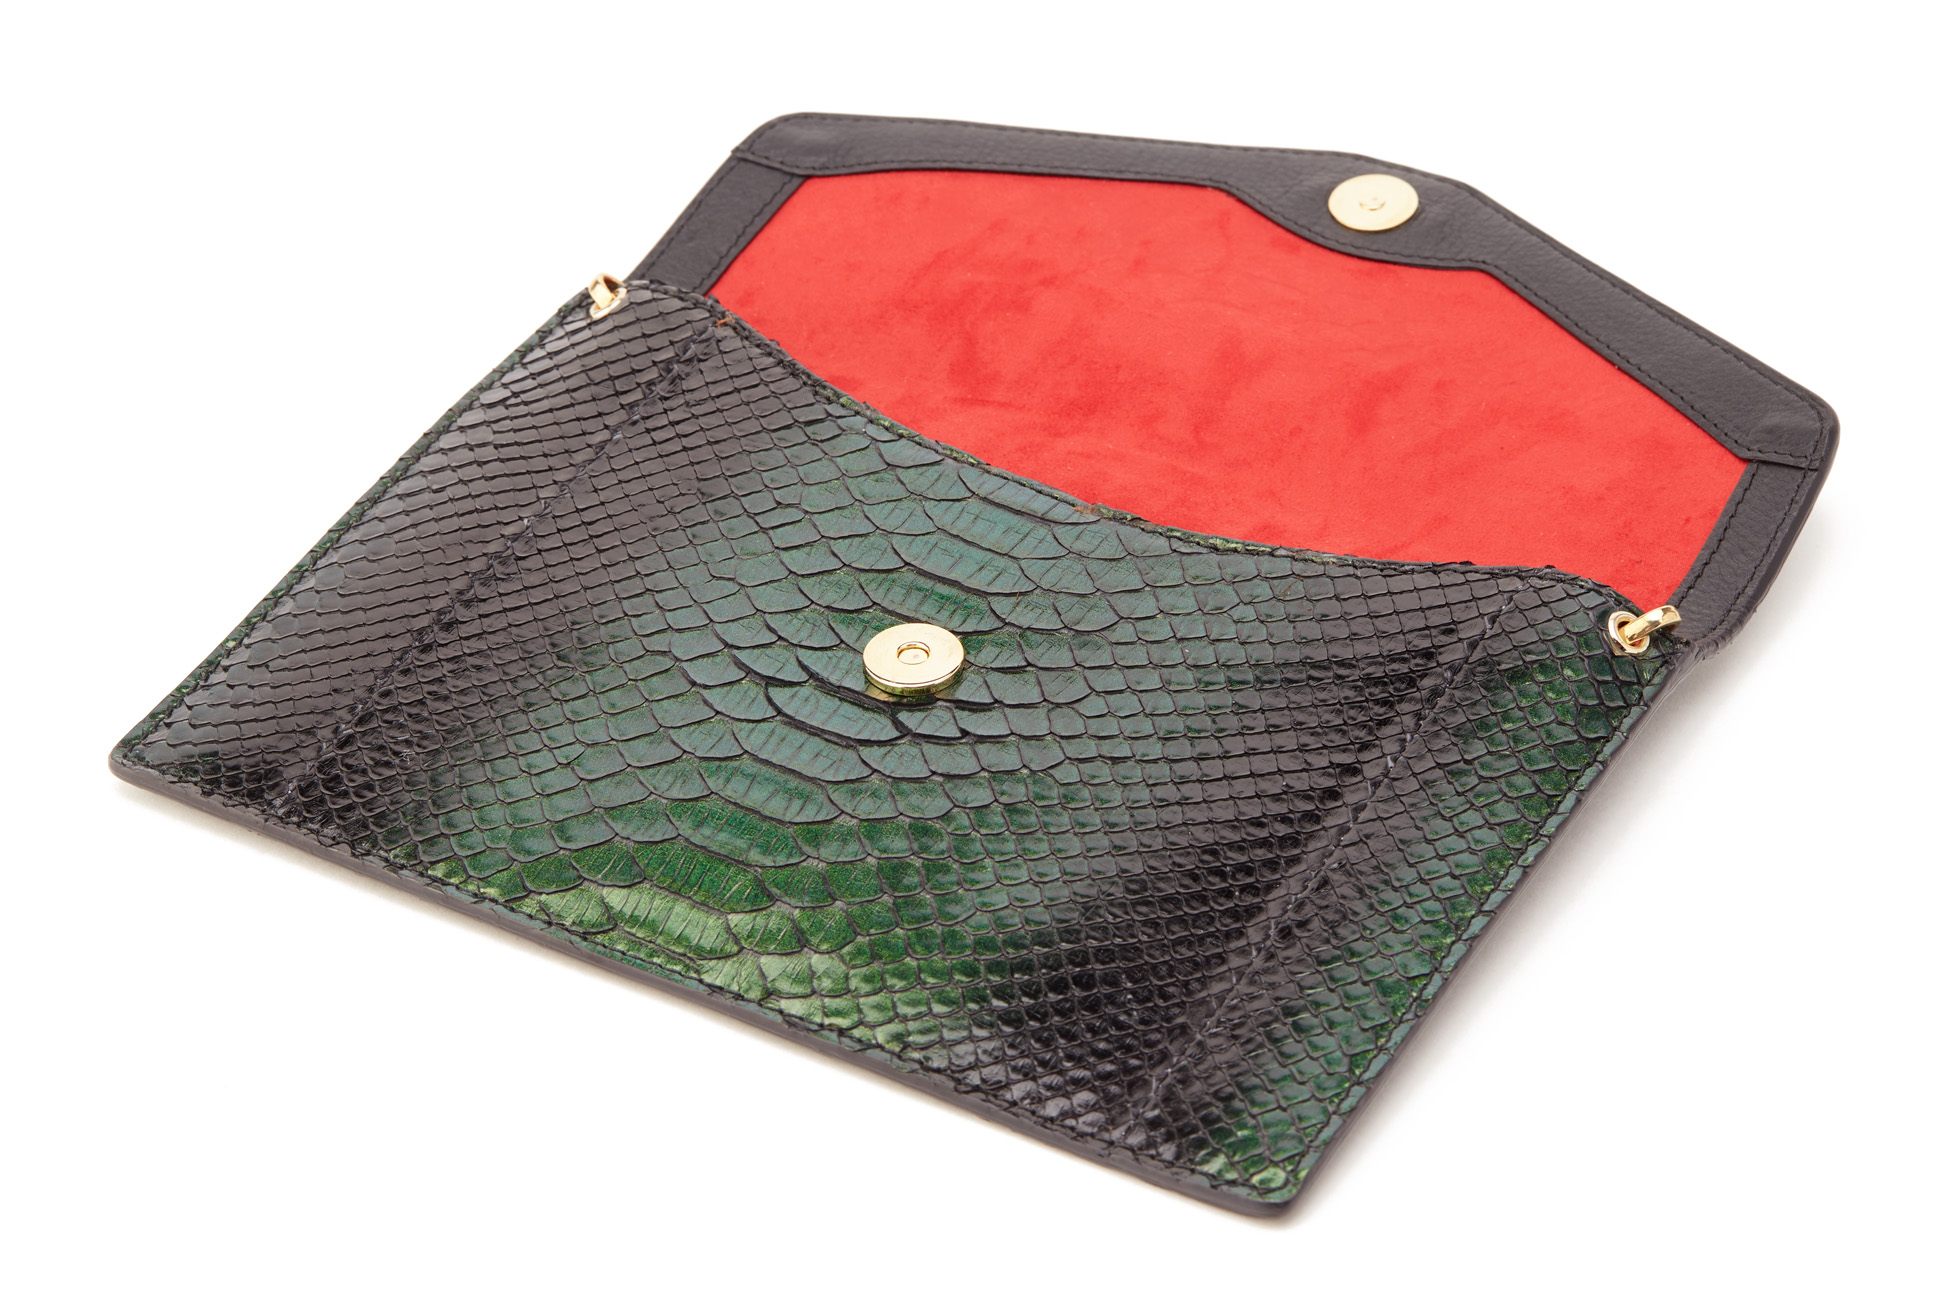 AN AMISHI LONDON PYTHON SKIN LEATHER CLUTCH - Image 3 of 3